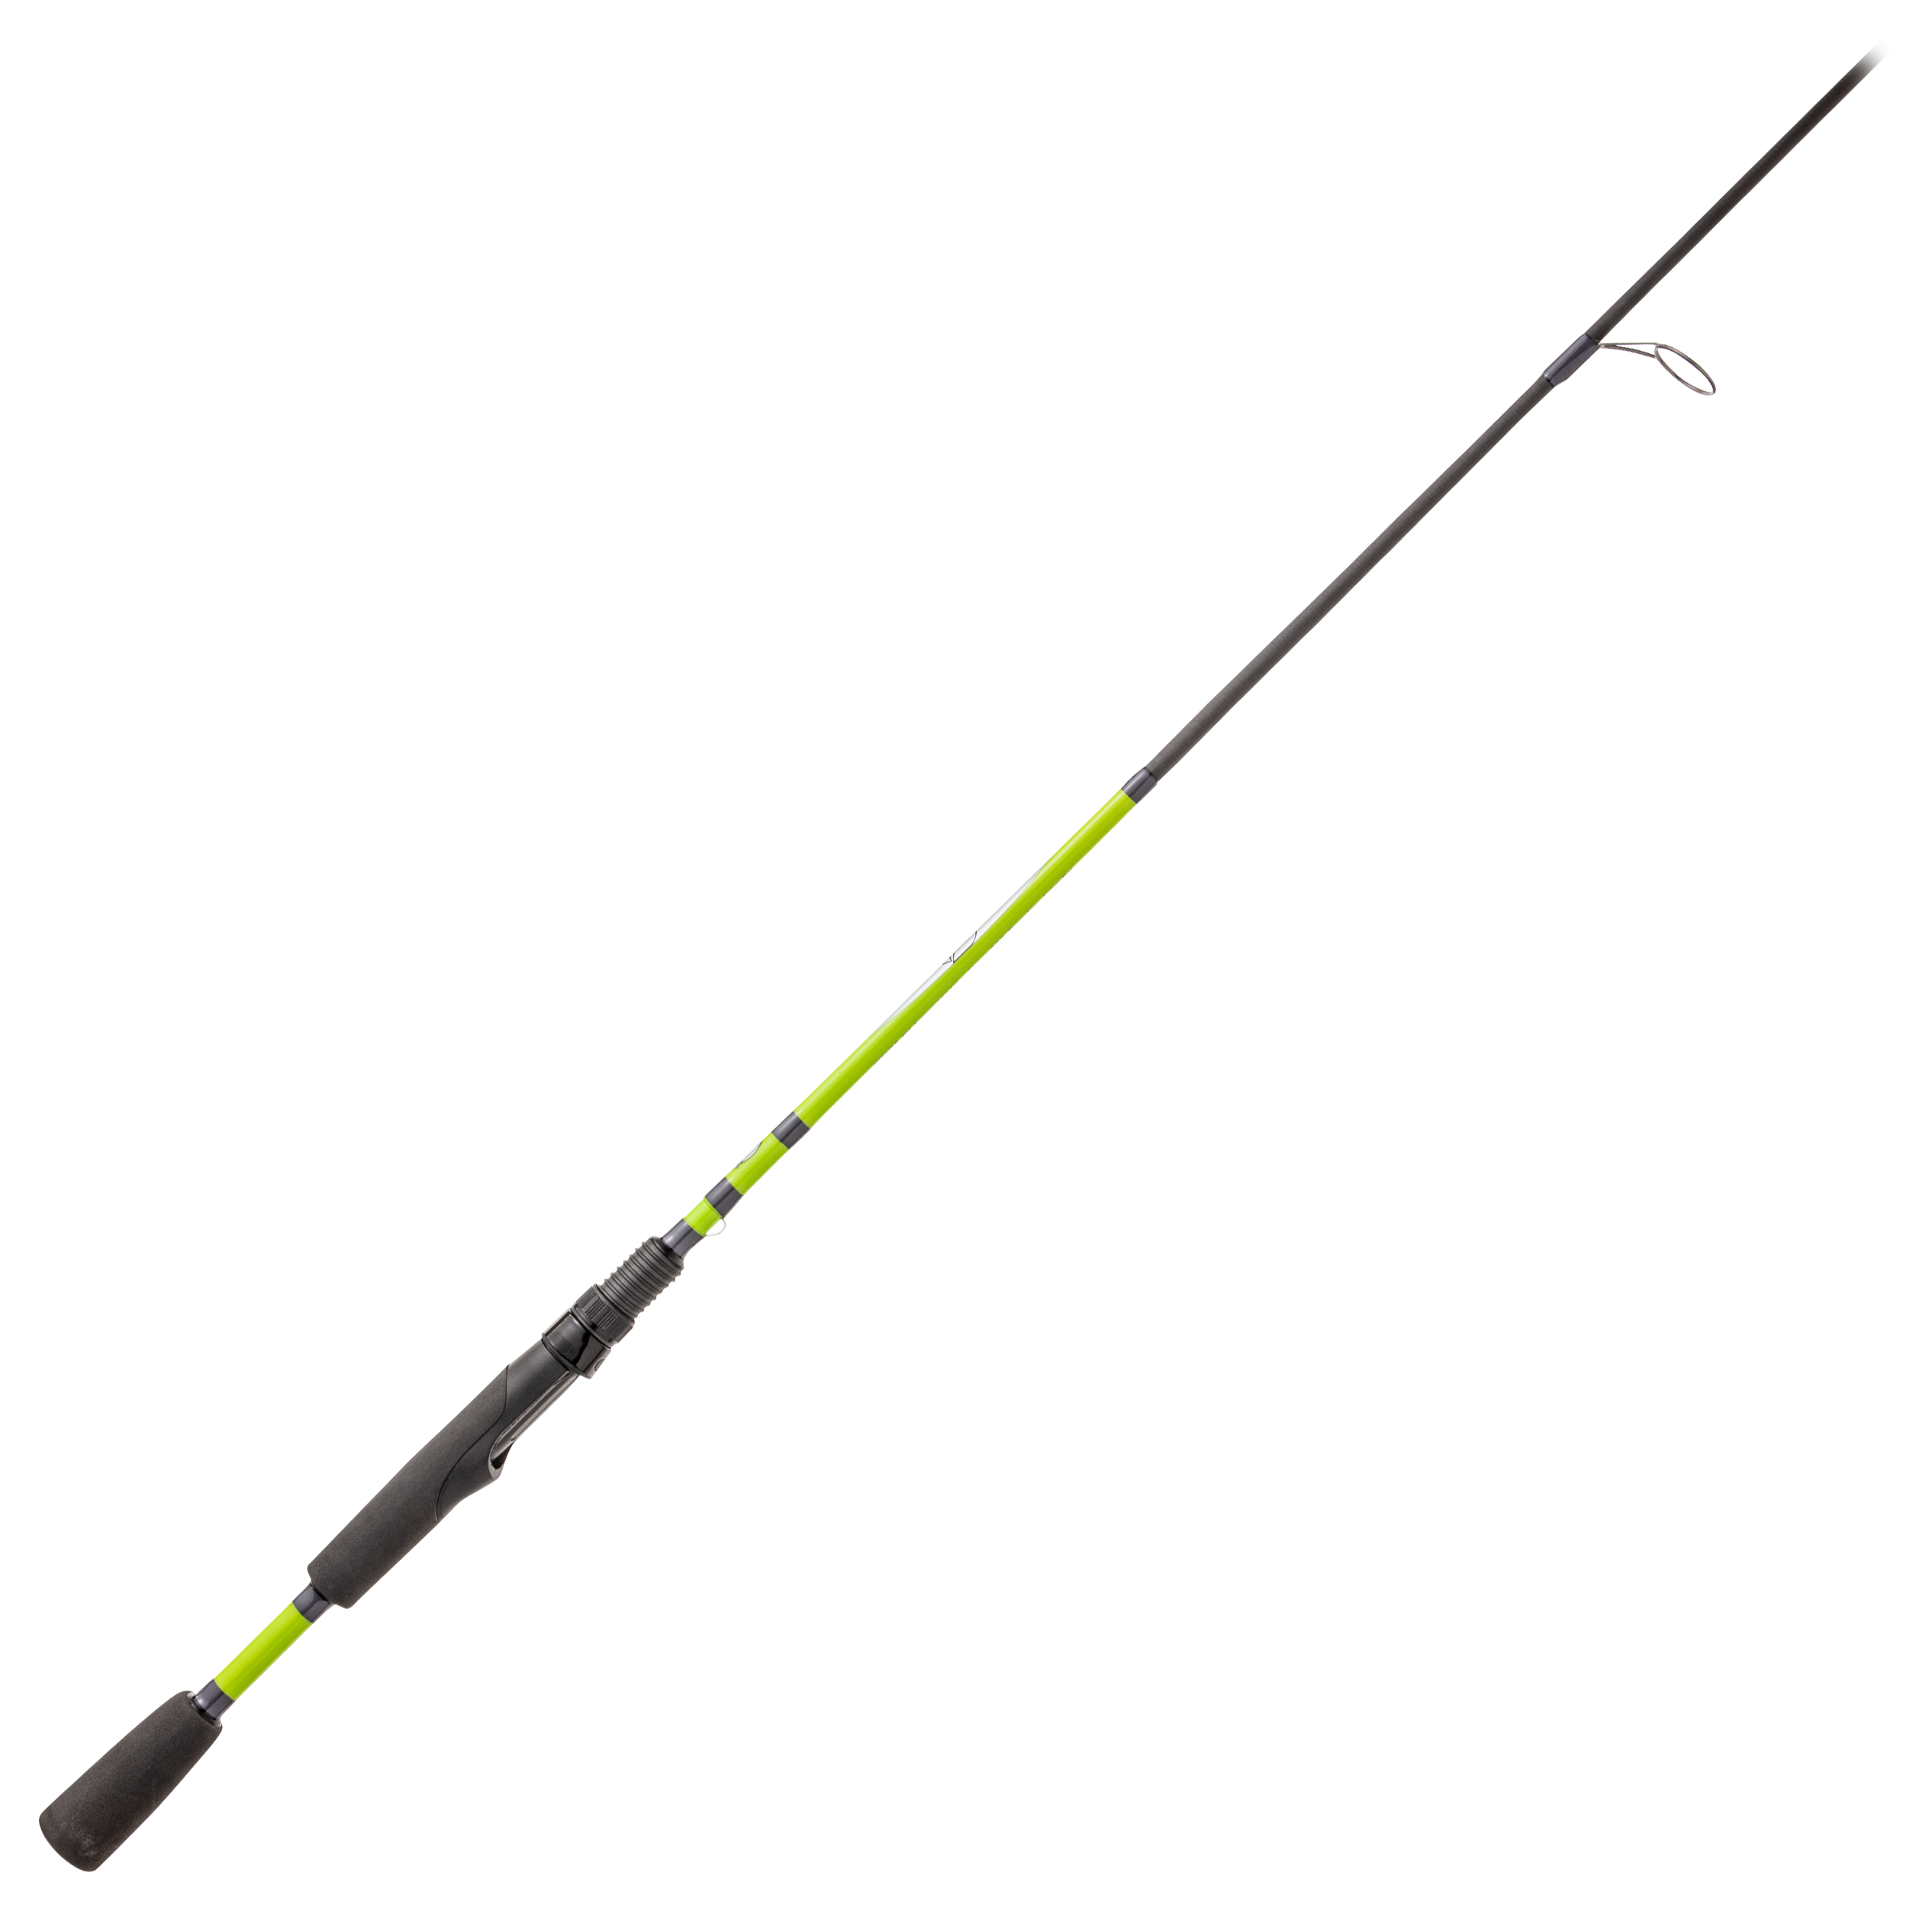 Bass Pro Shops Tourney Special Spinning Rod - 7' - Medium Heavy - D - 2 Pieces